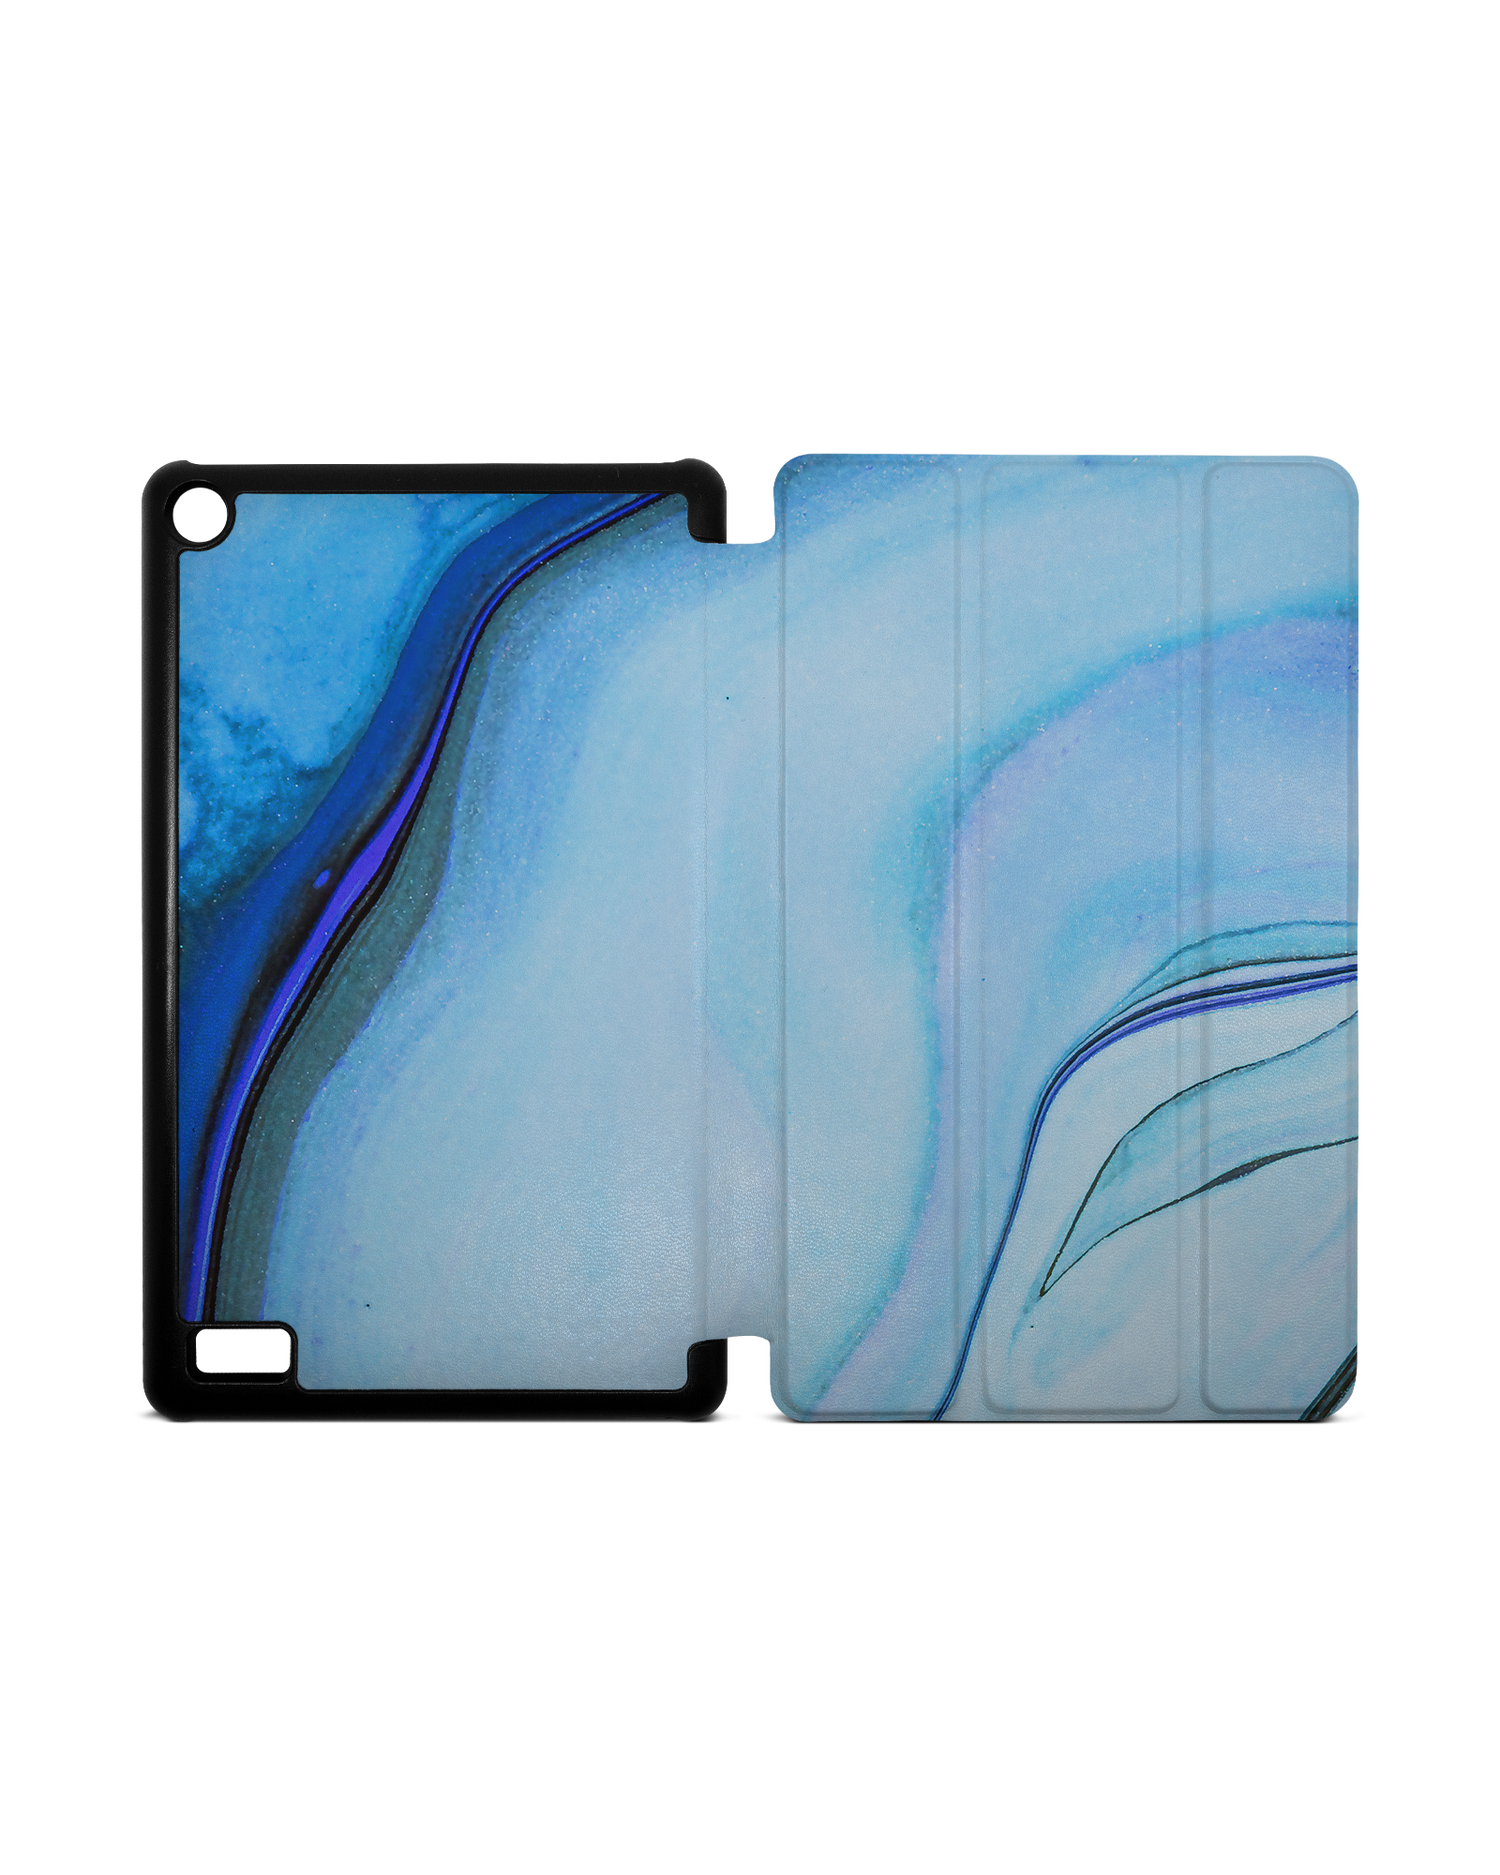 Cool Blues Tablet Smart Case for Amazon Fire 7: Opened